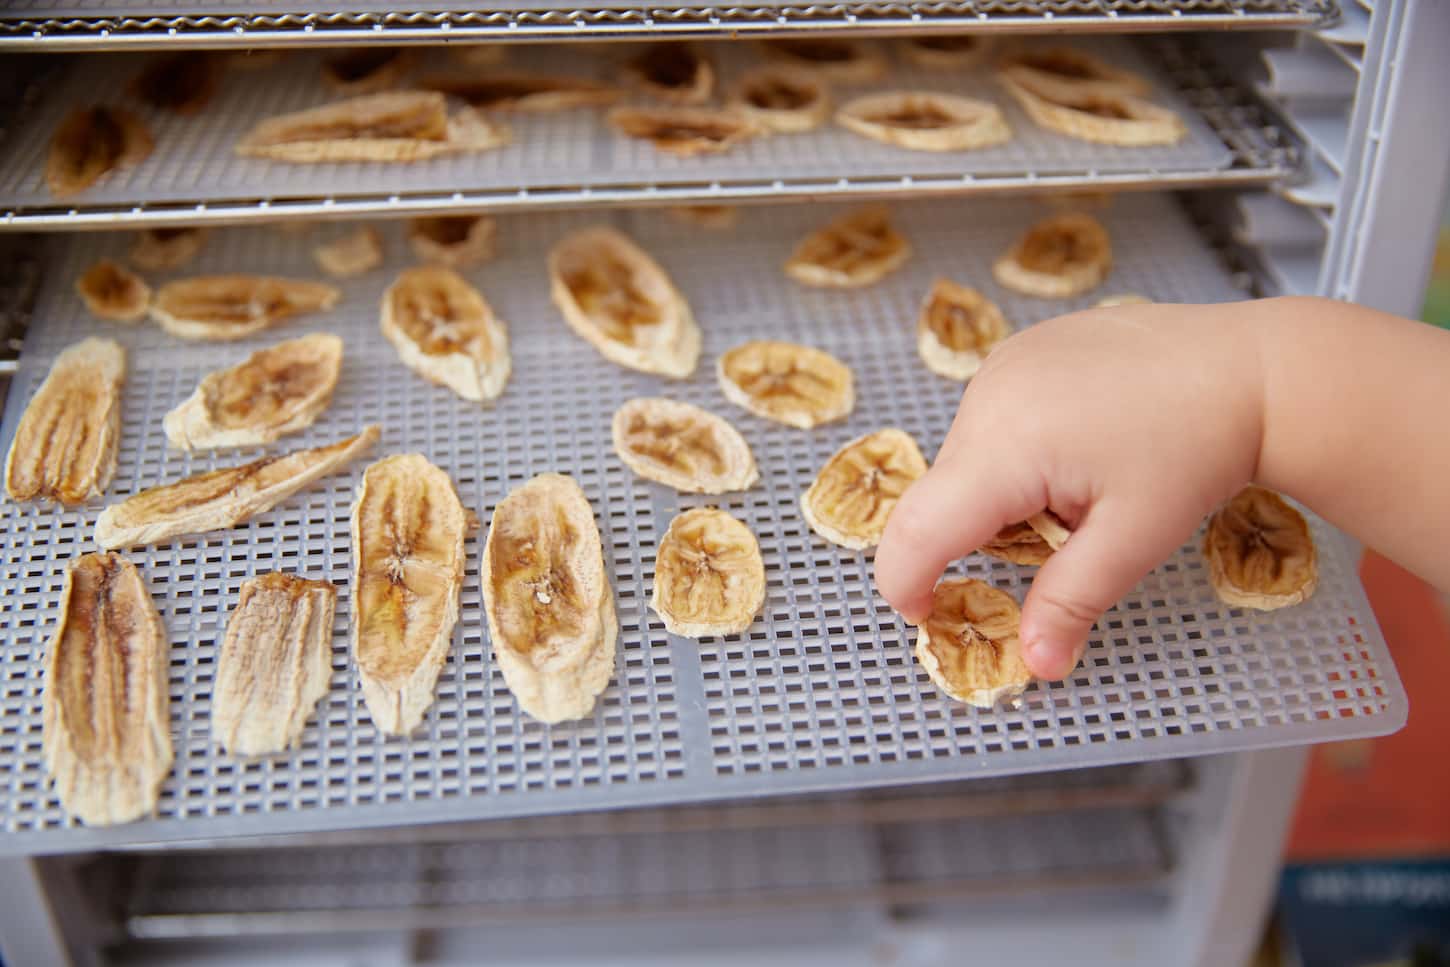 An image of a child's hand takes a dried banana from the grid of an electric dehydrator.